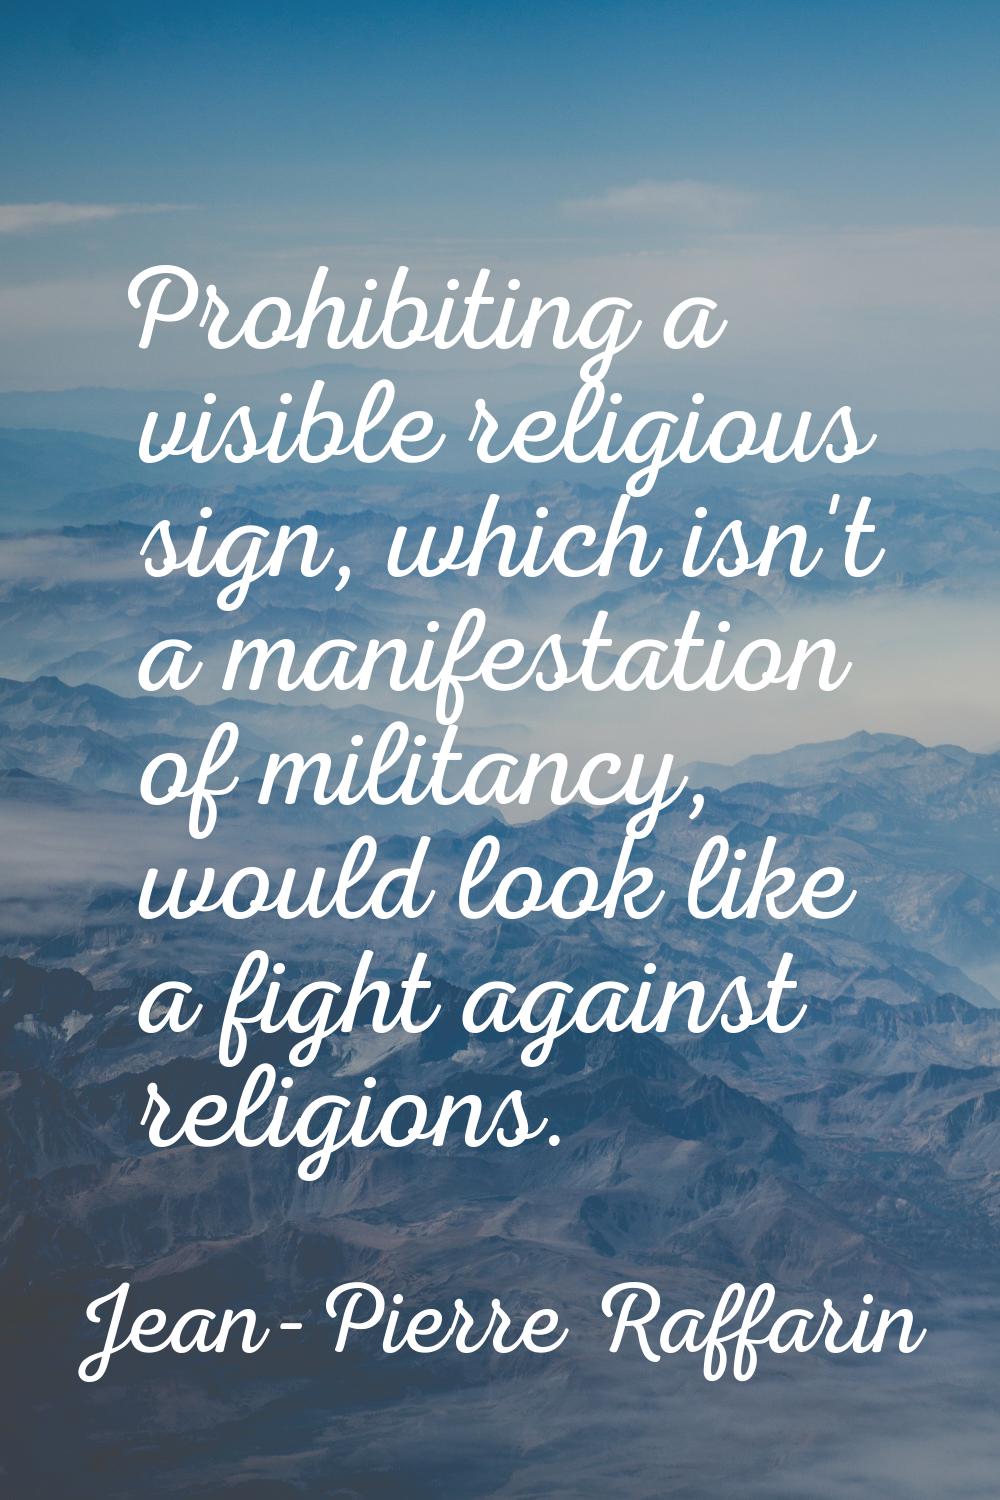 Prohibiting a visible religious sign, which isn't a manifestation of militancy, would look like a f